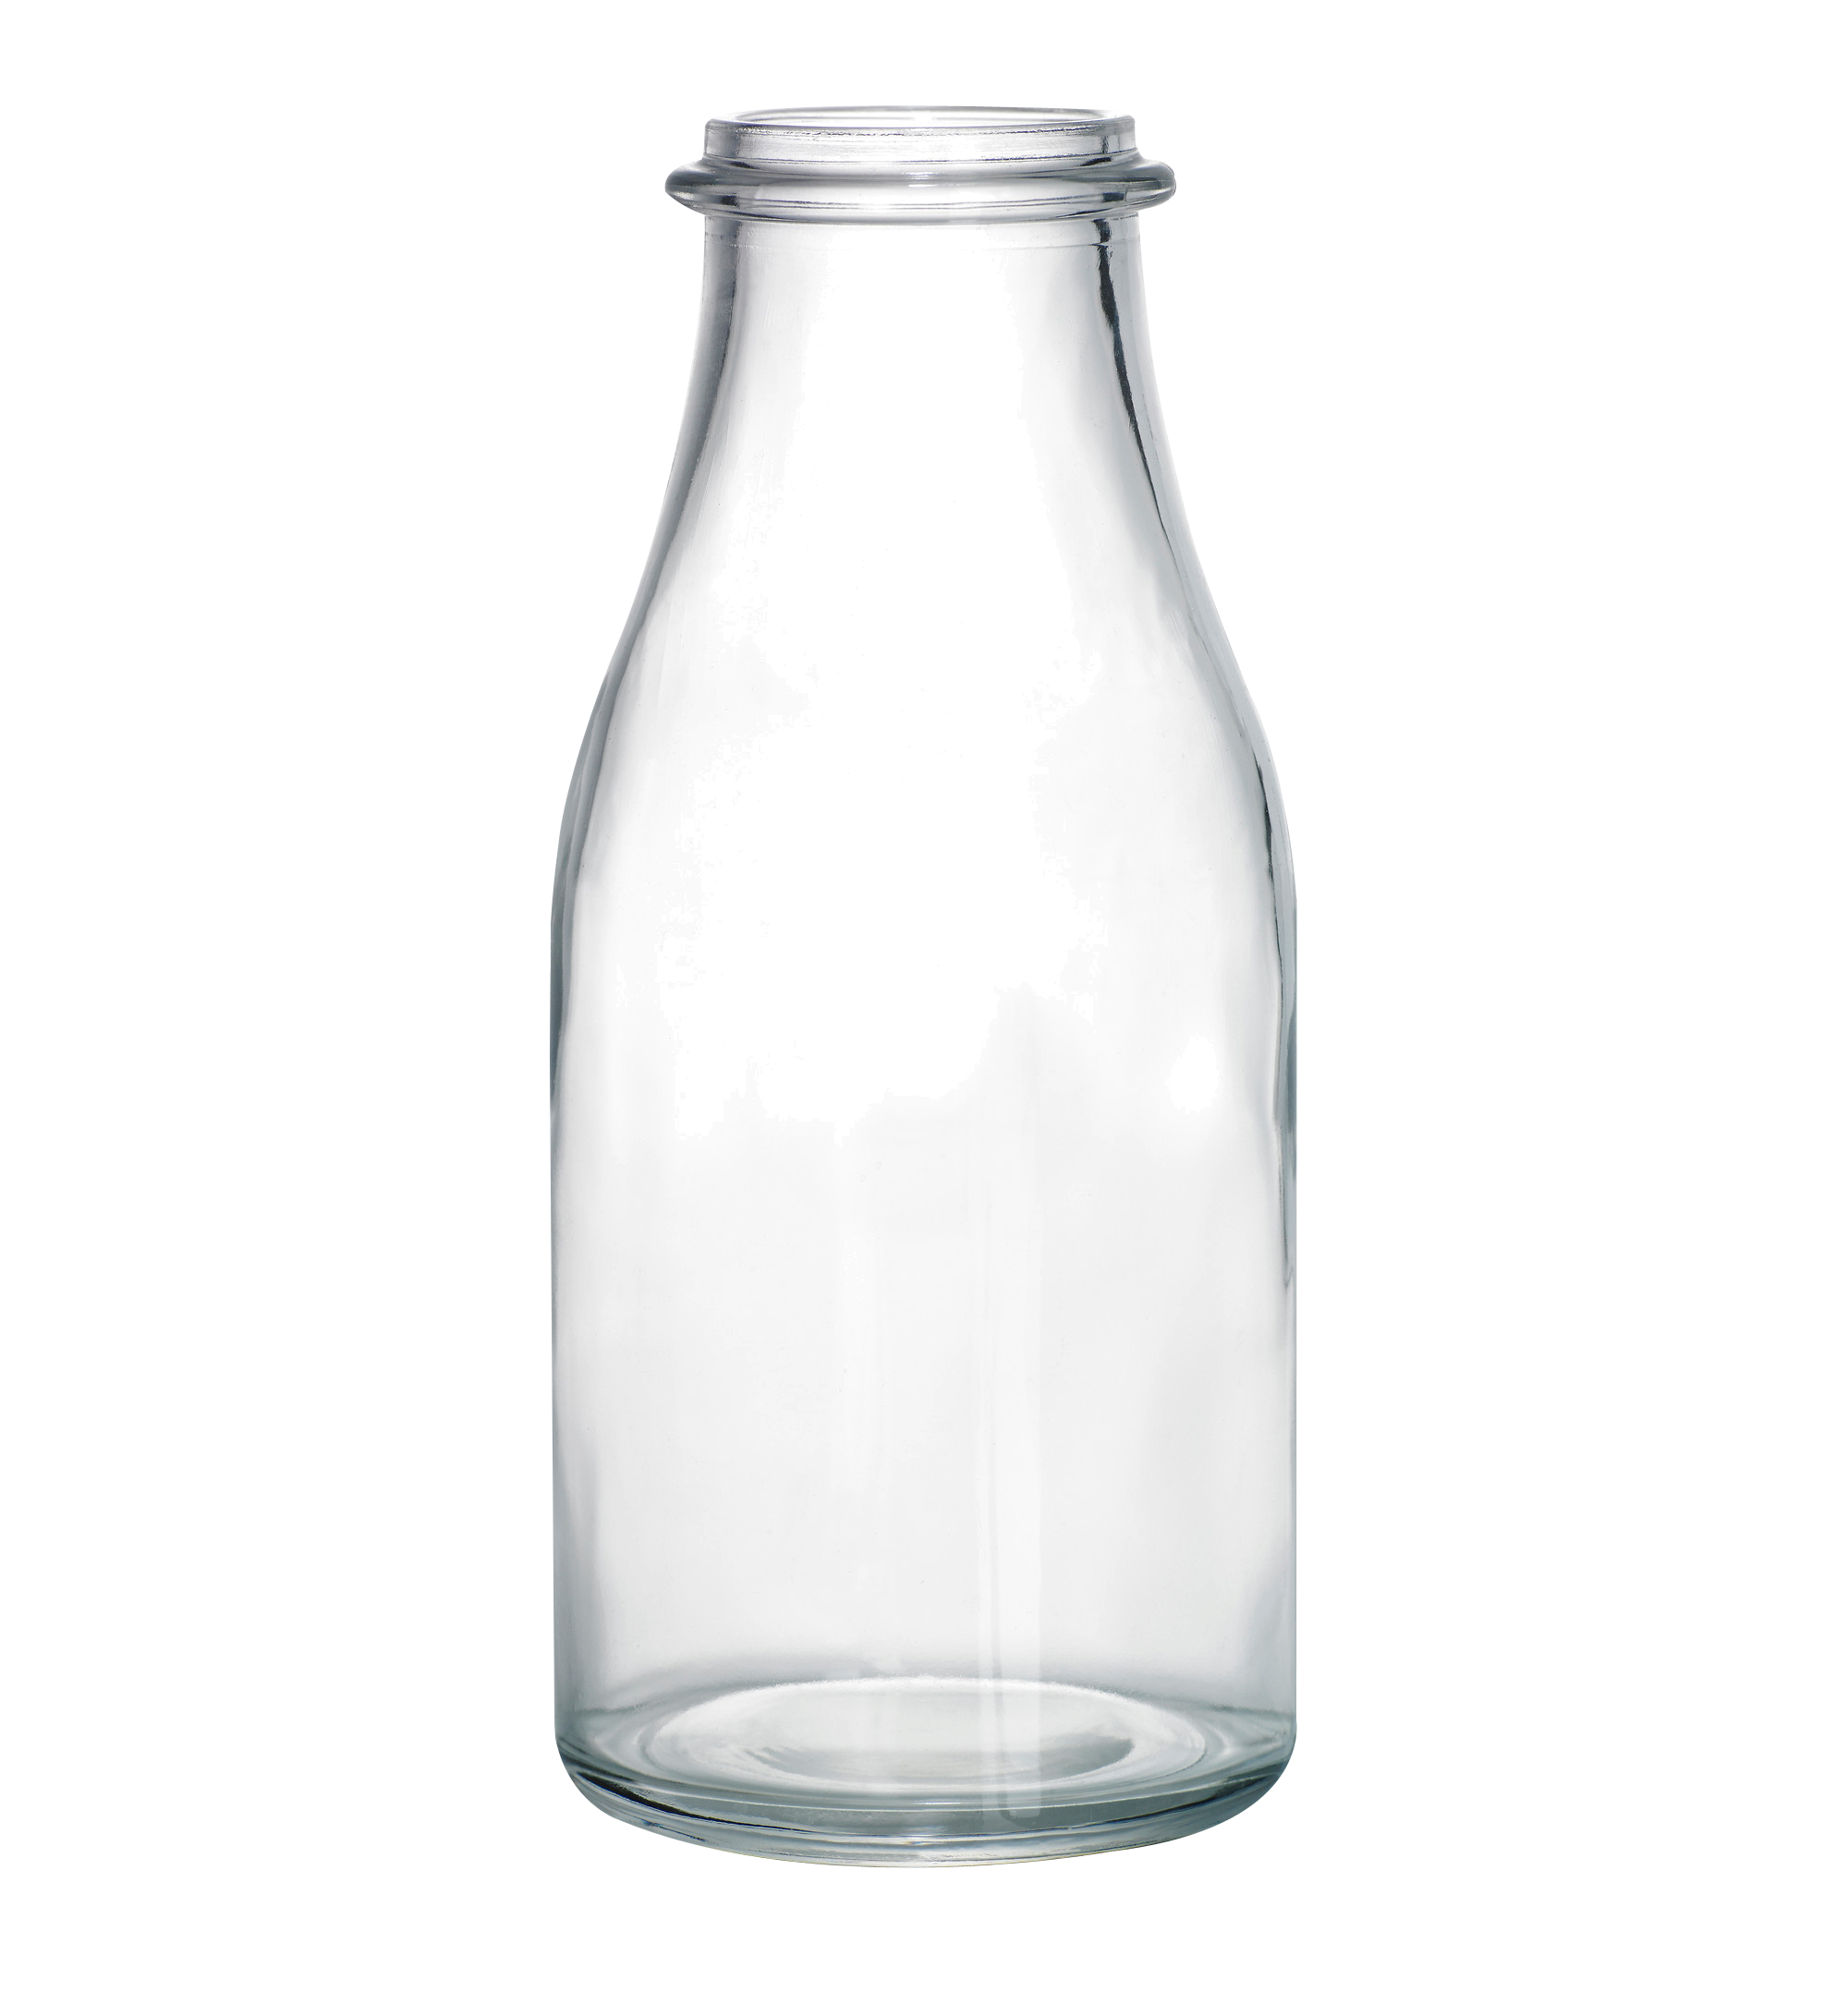 Water Glass Bottle Empty PNG Image High Quality PNG Image